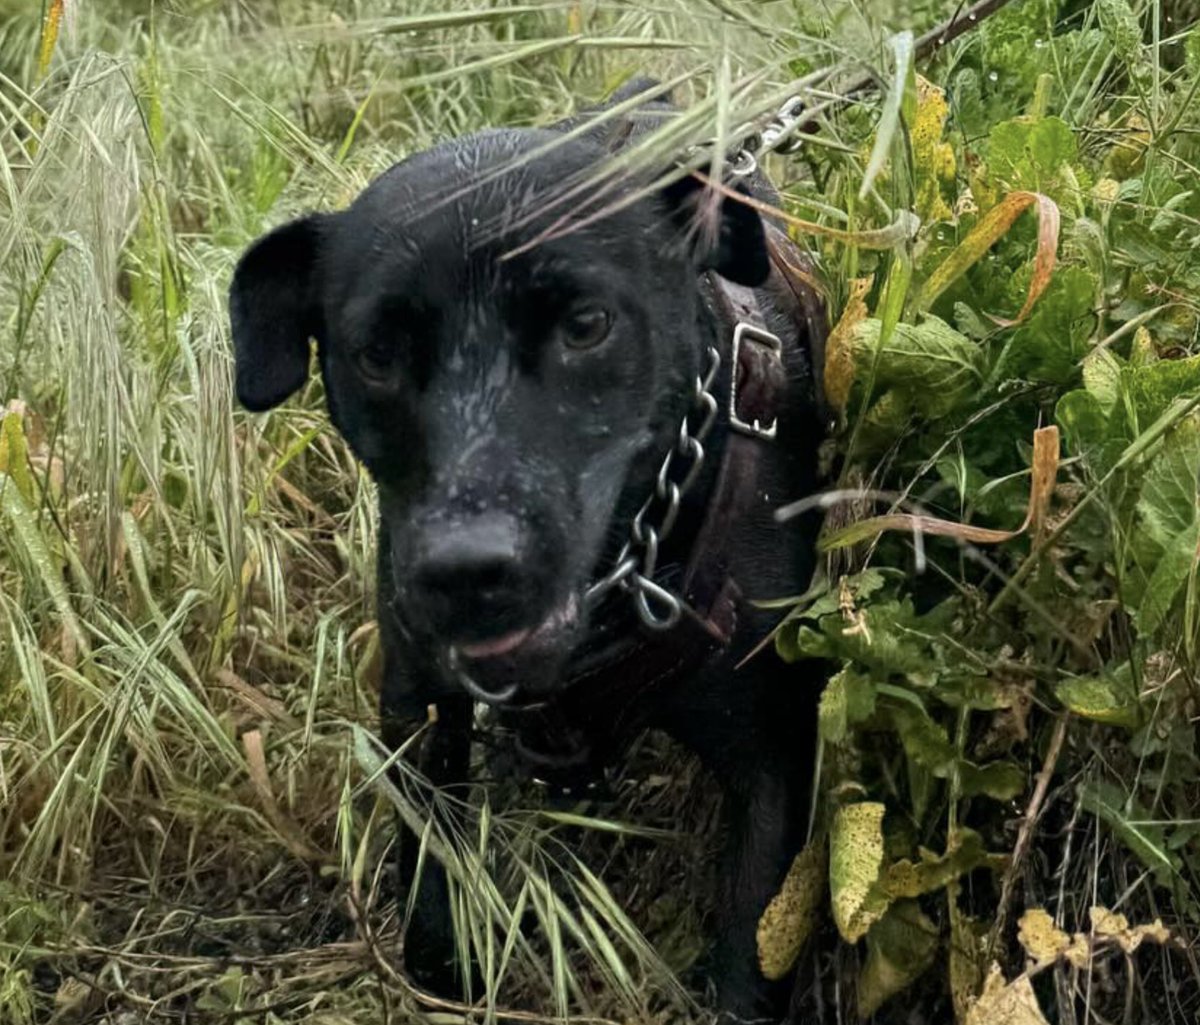 #LASD SEB canine “Olive”, a Patterdale Terrier, and her partner are on the job ready to respond rain or shine to serve the Los Angeles County community.